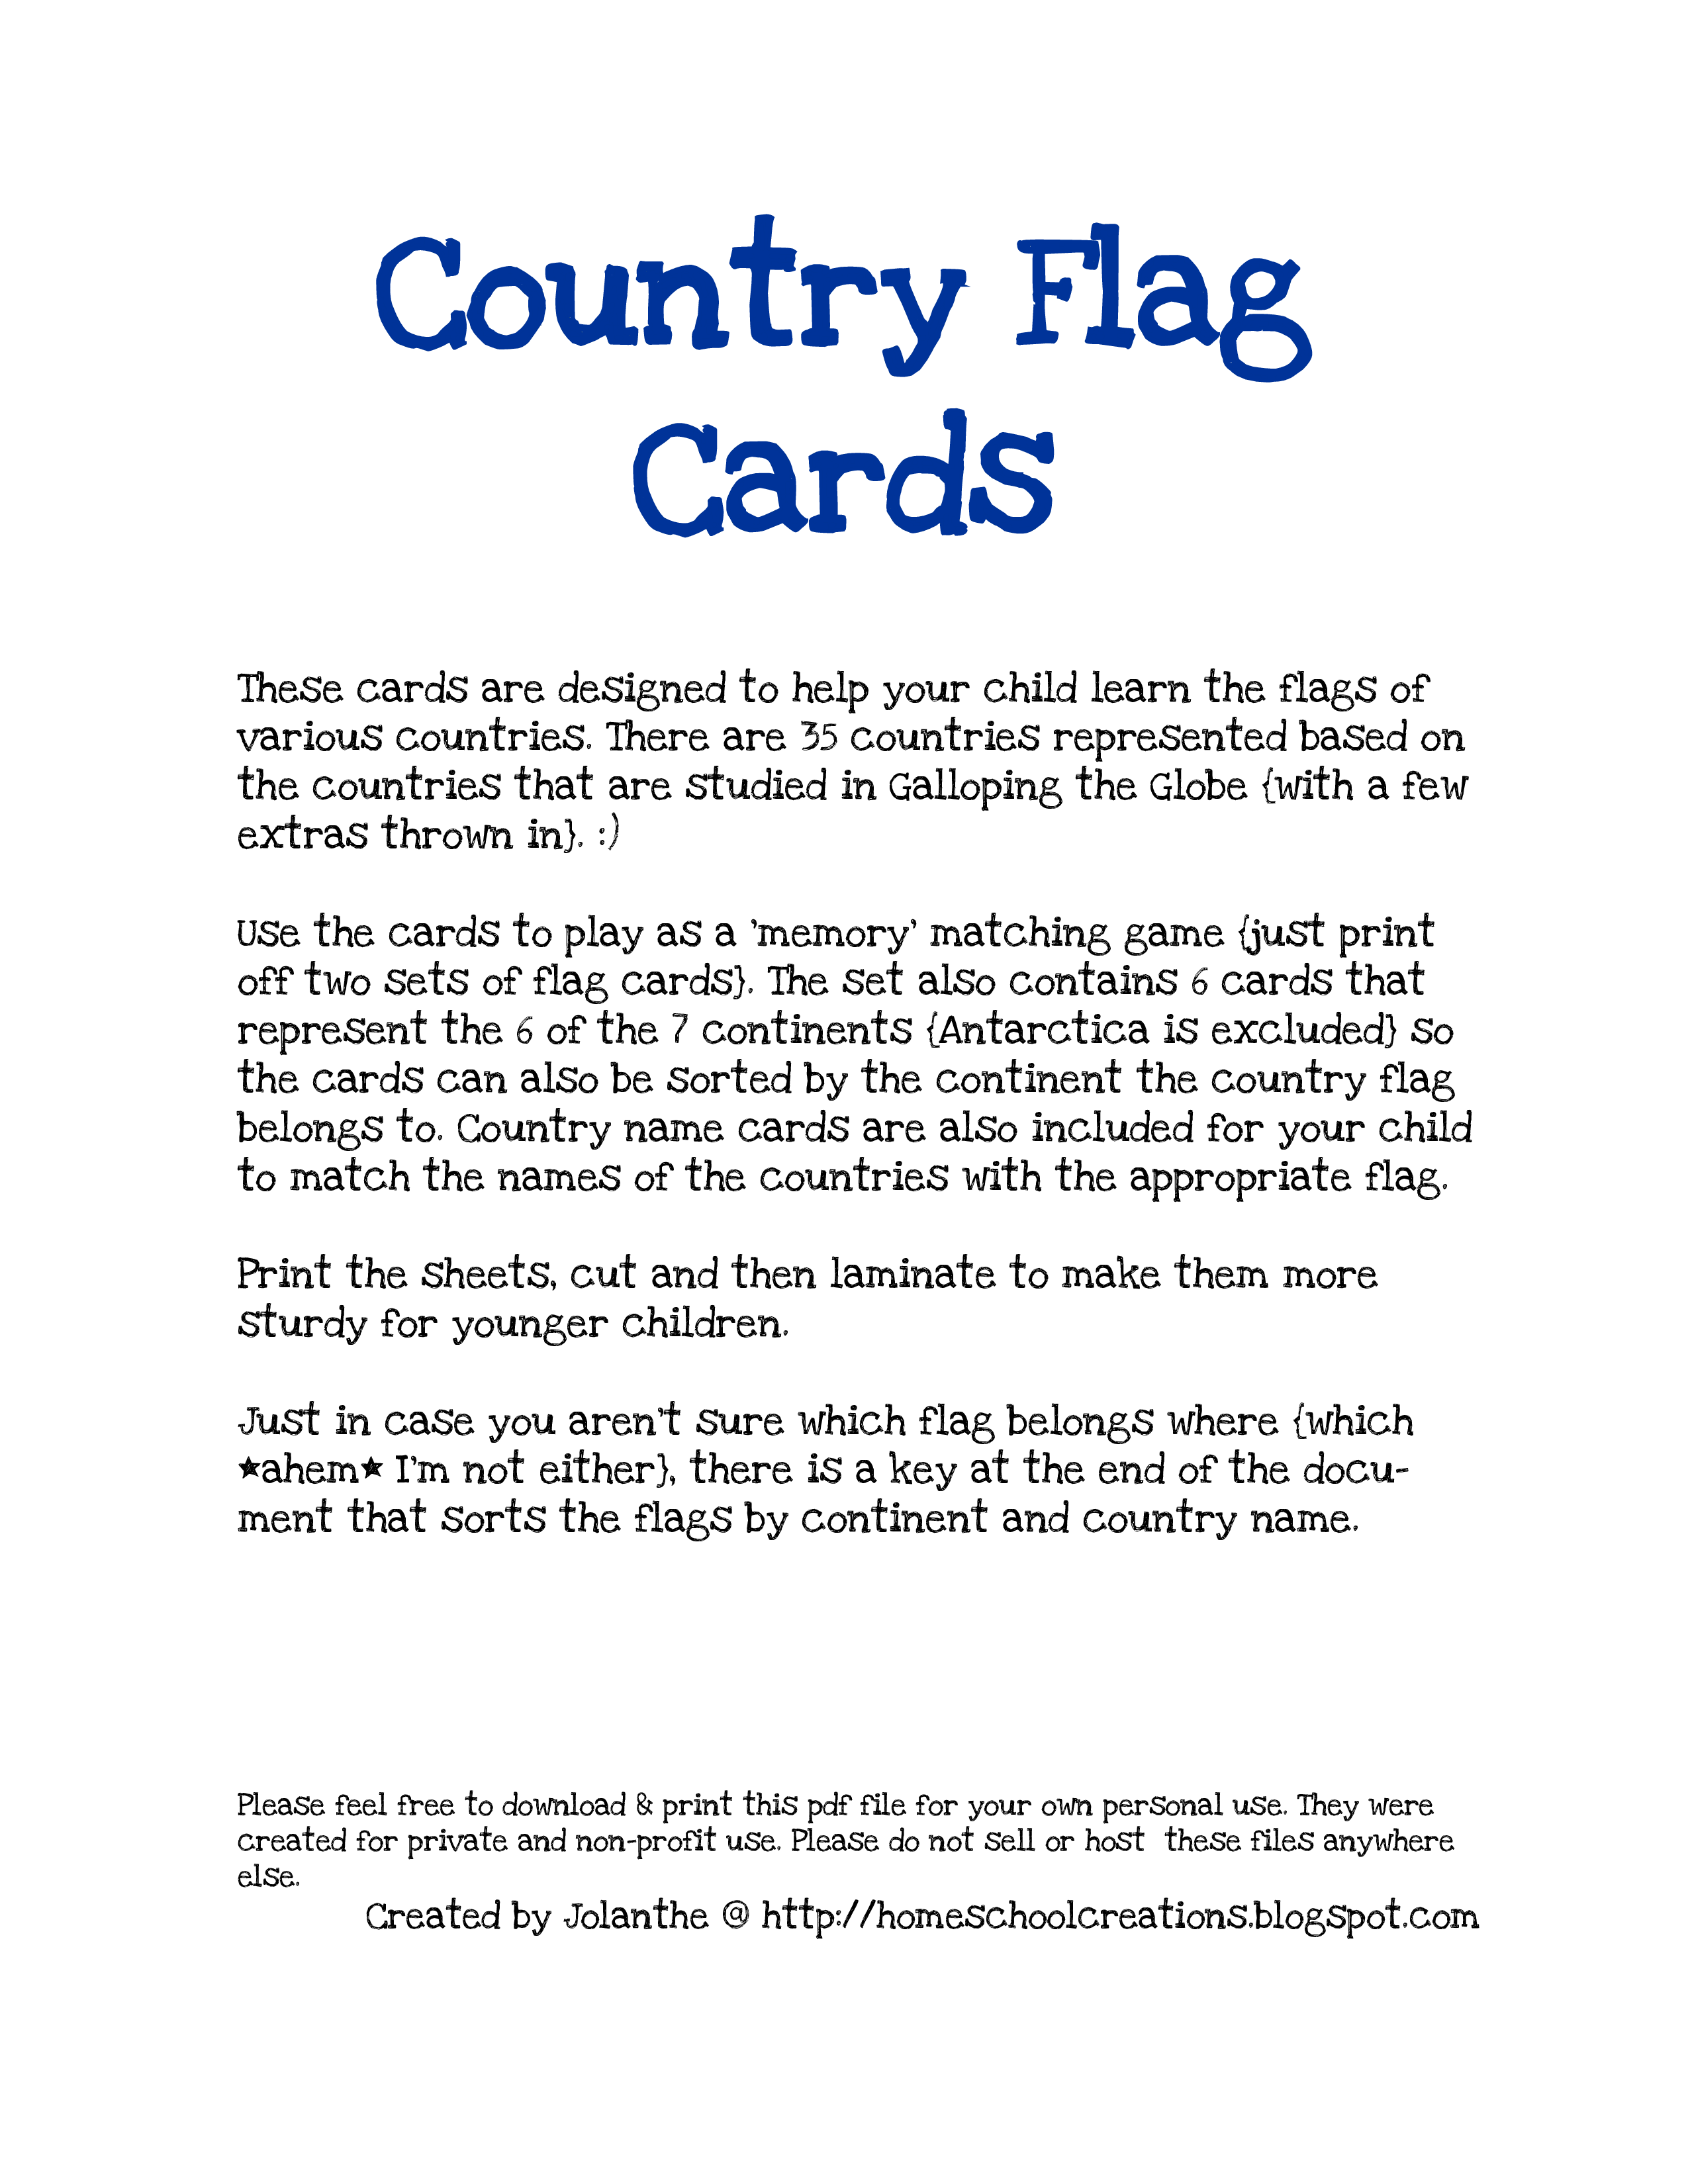 Flags of Countries for Children main image